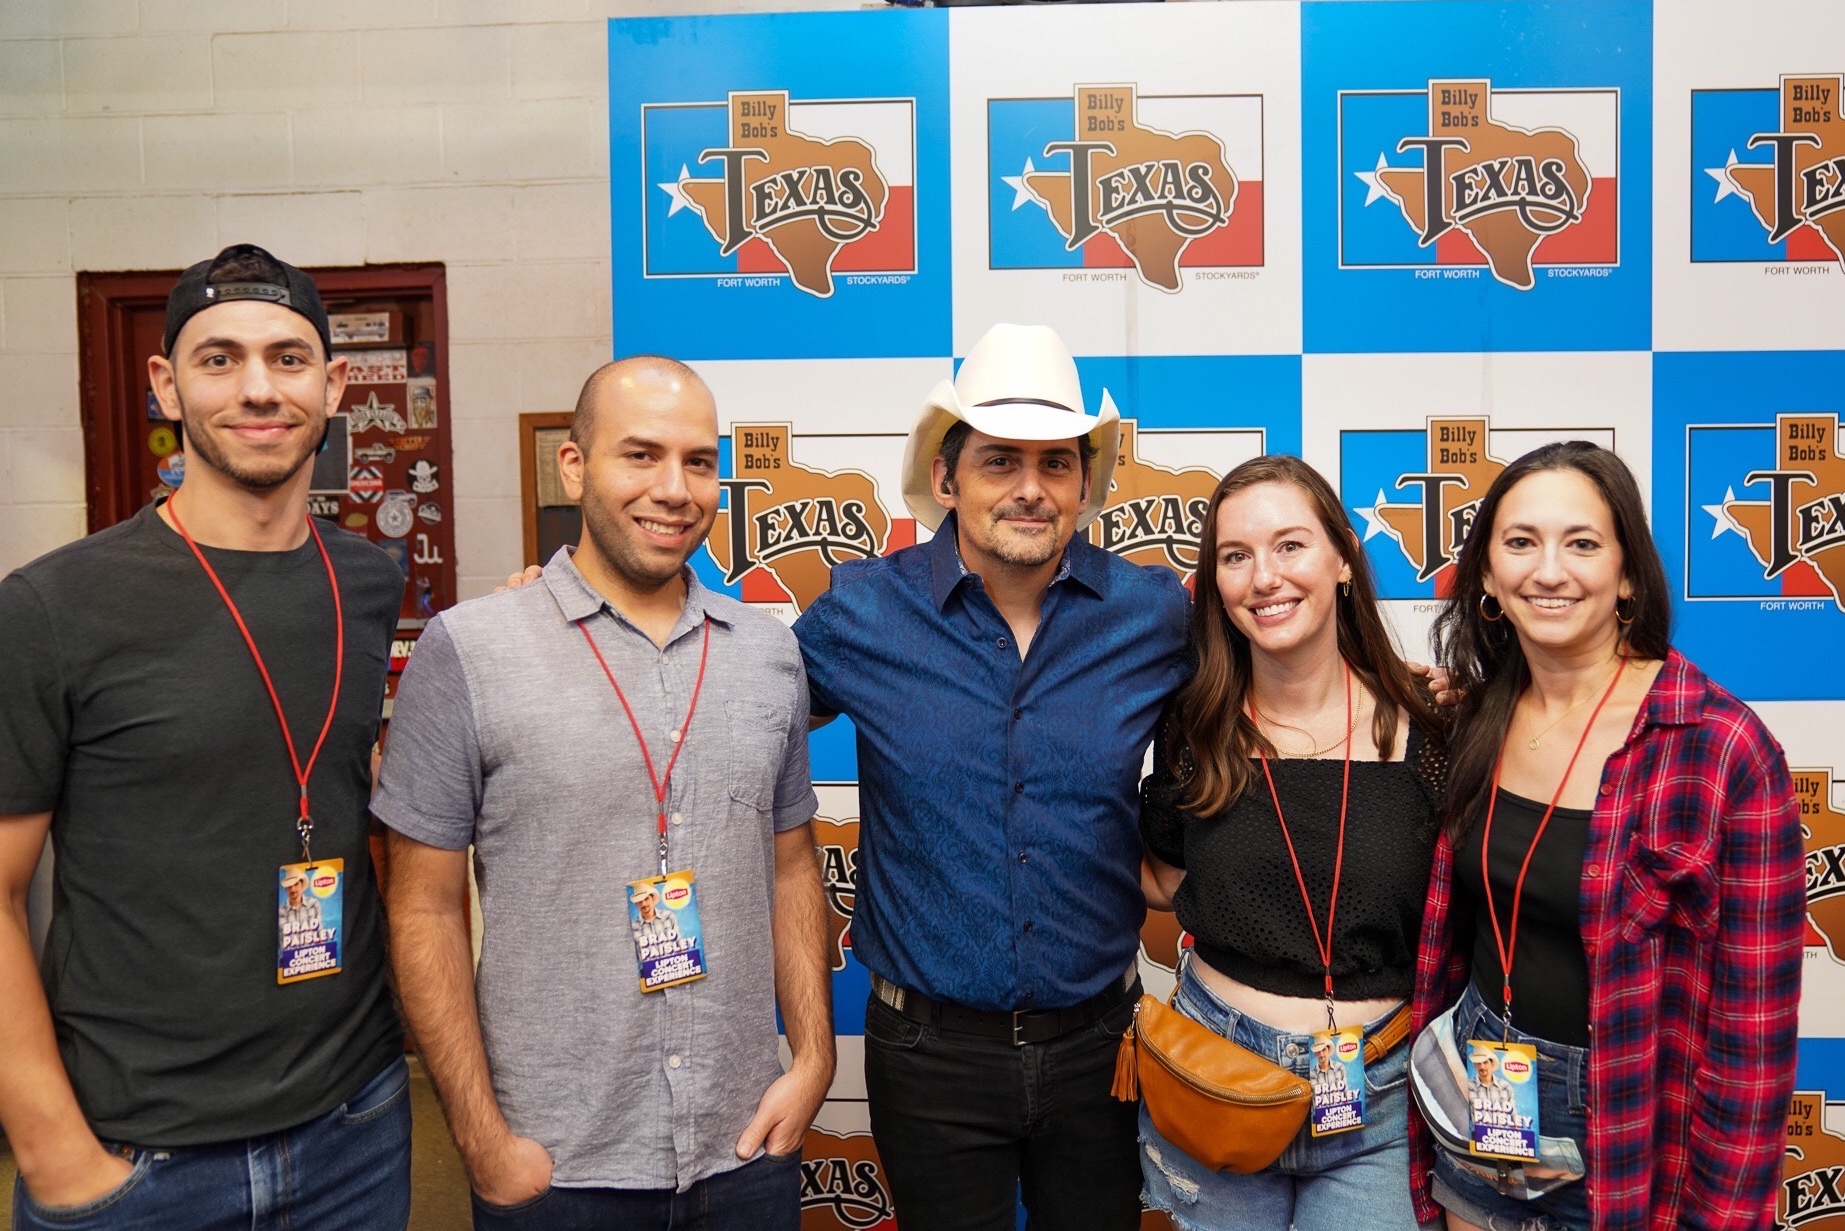 Alyssa and Michael with friends and Brad Paisley